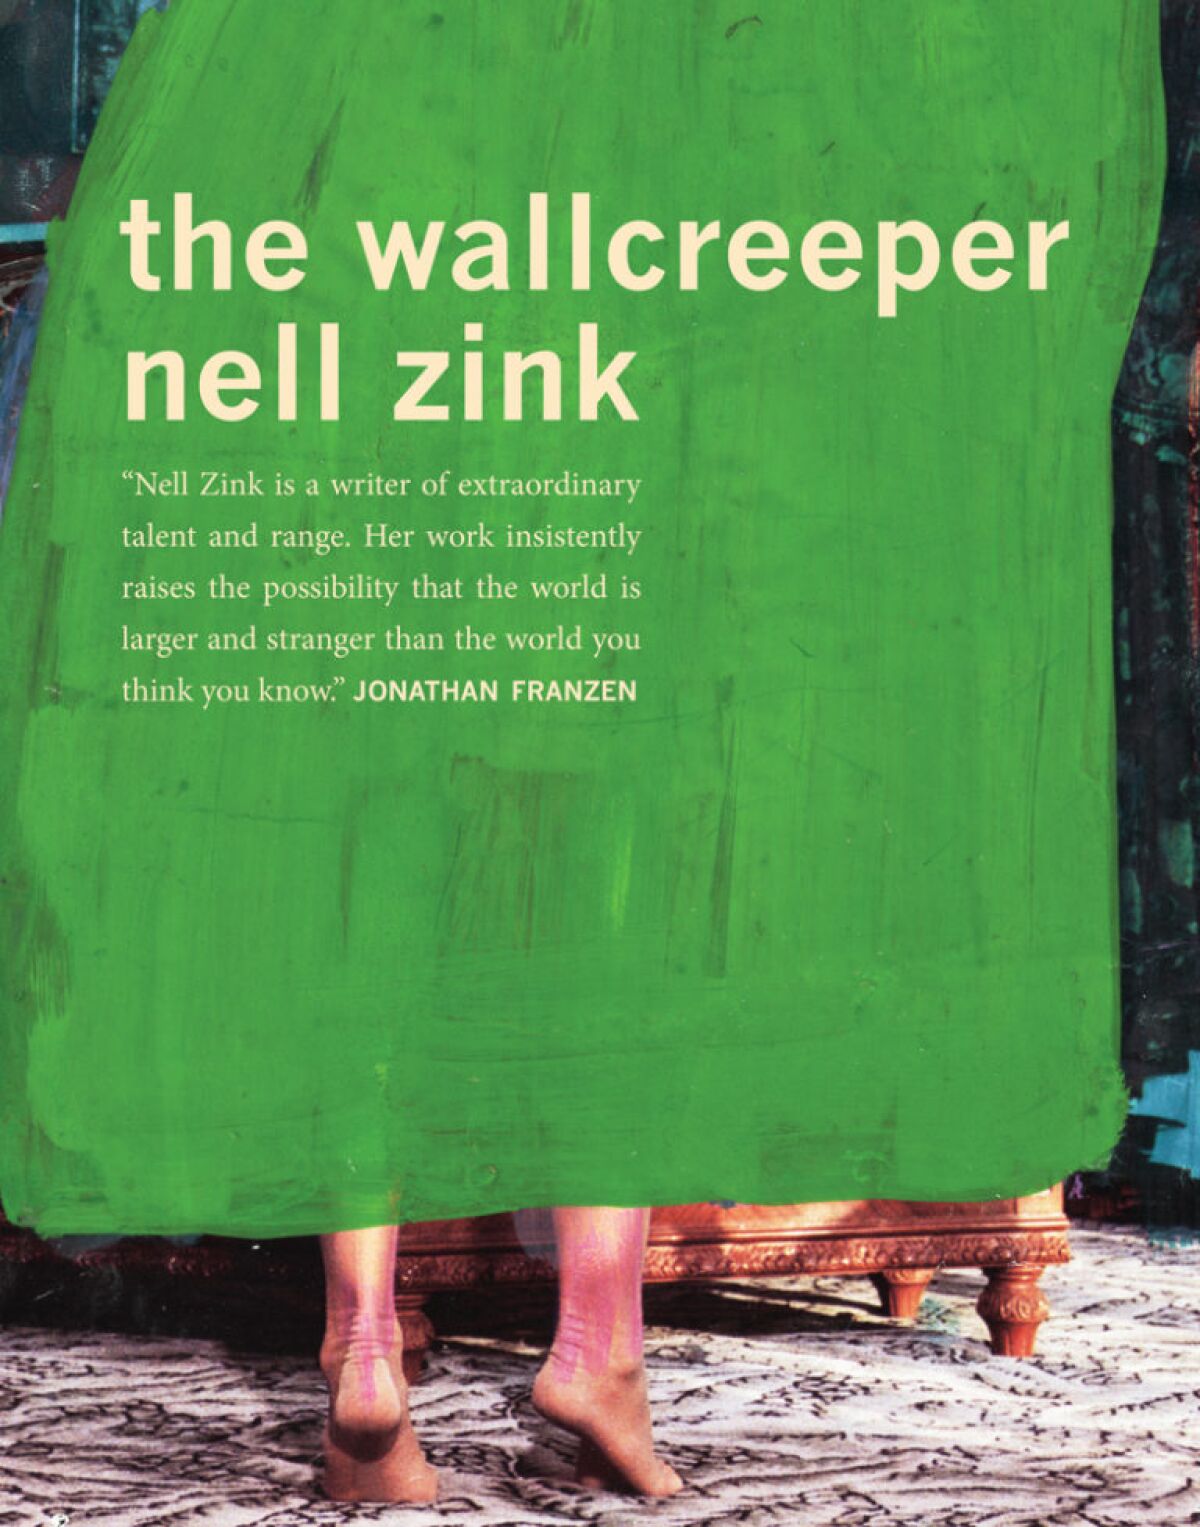 A tiny press, Dorothy, took a chance on Nell Zink's "The Wallcreeper" before HarperCollins snapped up the author.